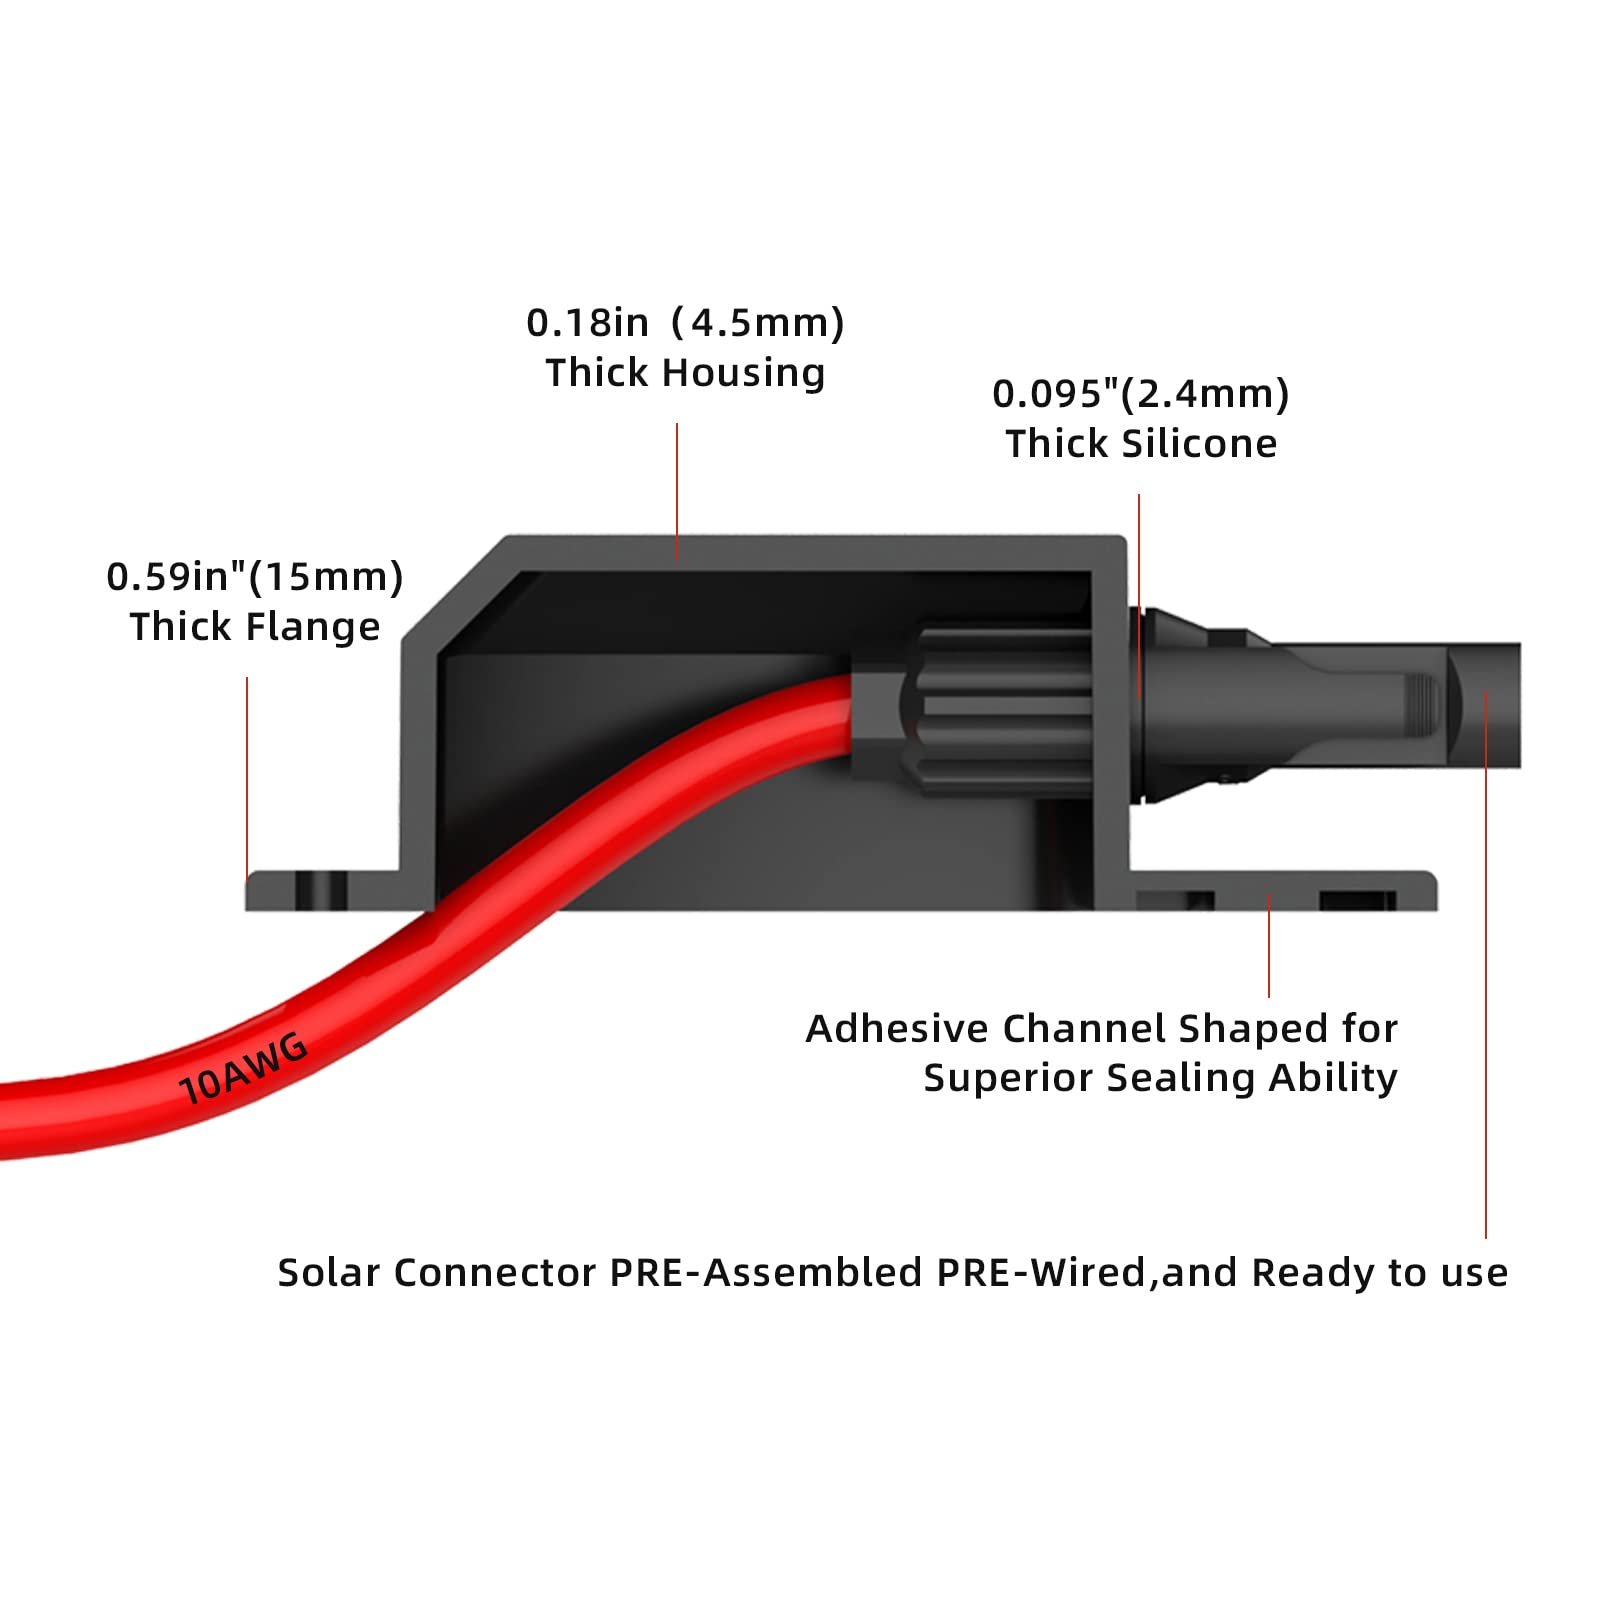 Solar Weatherproof Entry Gland Entry Housing, Through RV roof Solar Entry housing with 10AWG Solar Extension Cable Solar Connector Solar Project on RV, Campervan, Van